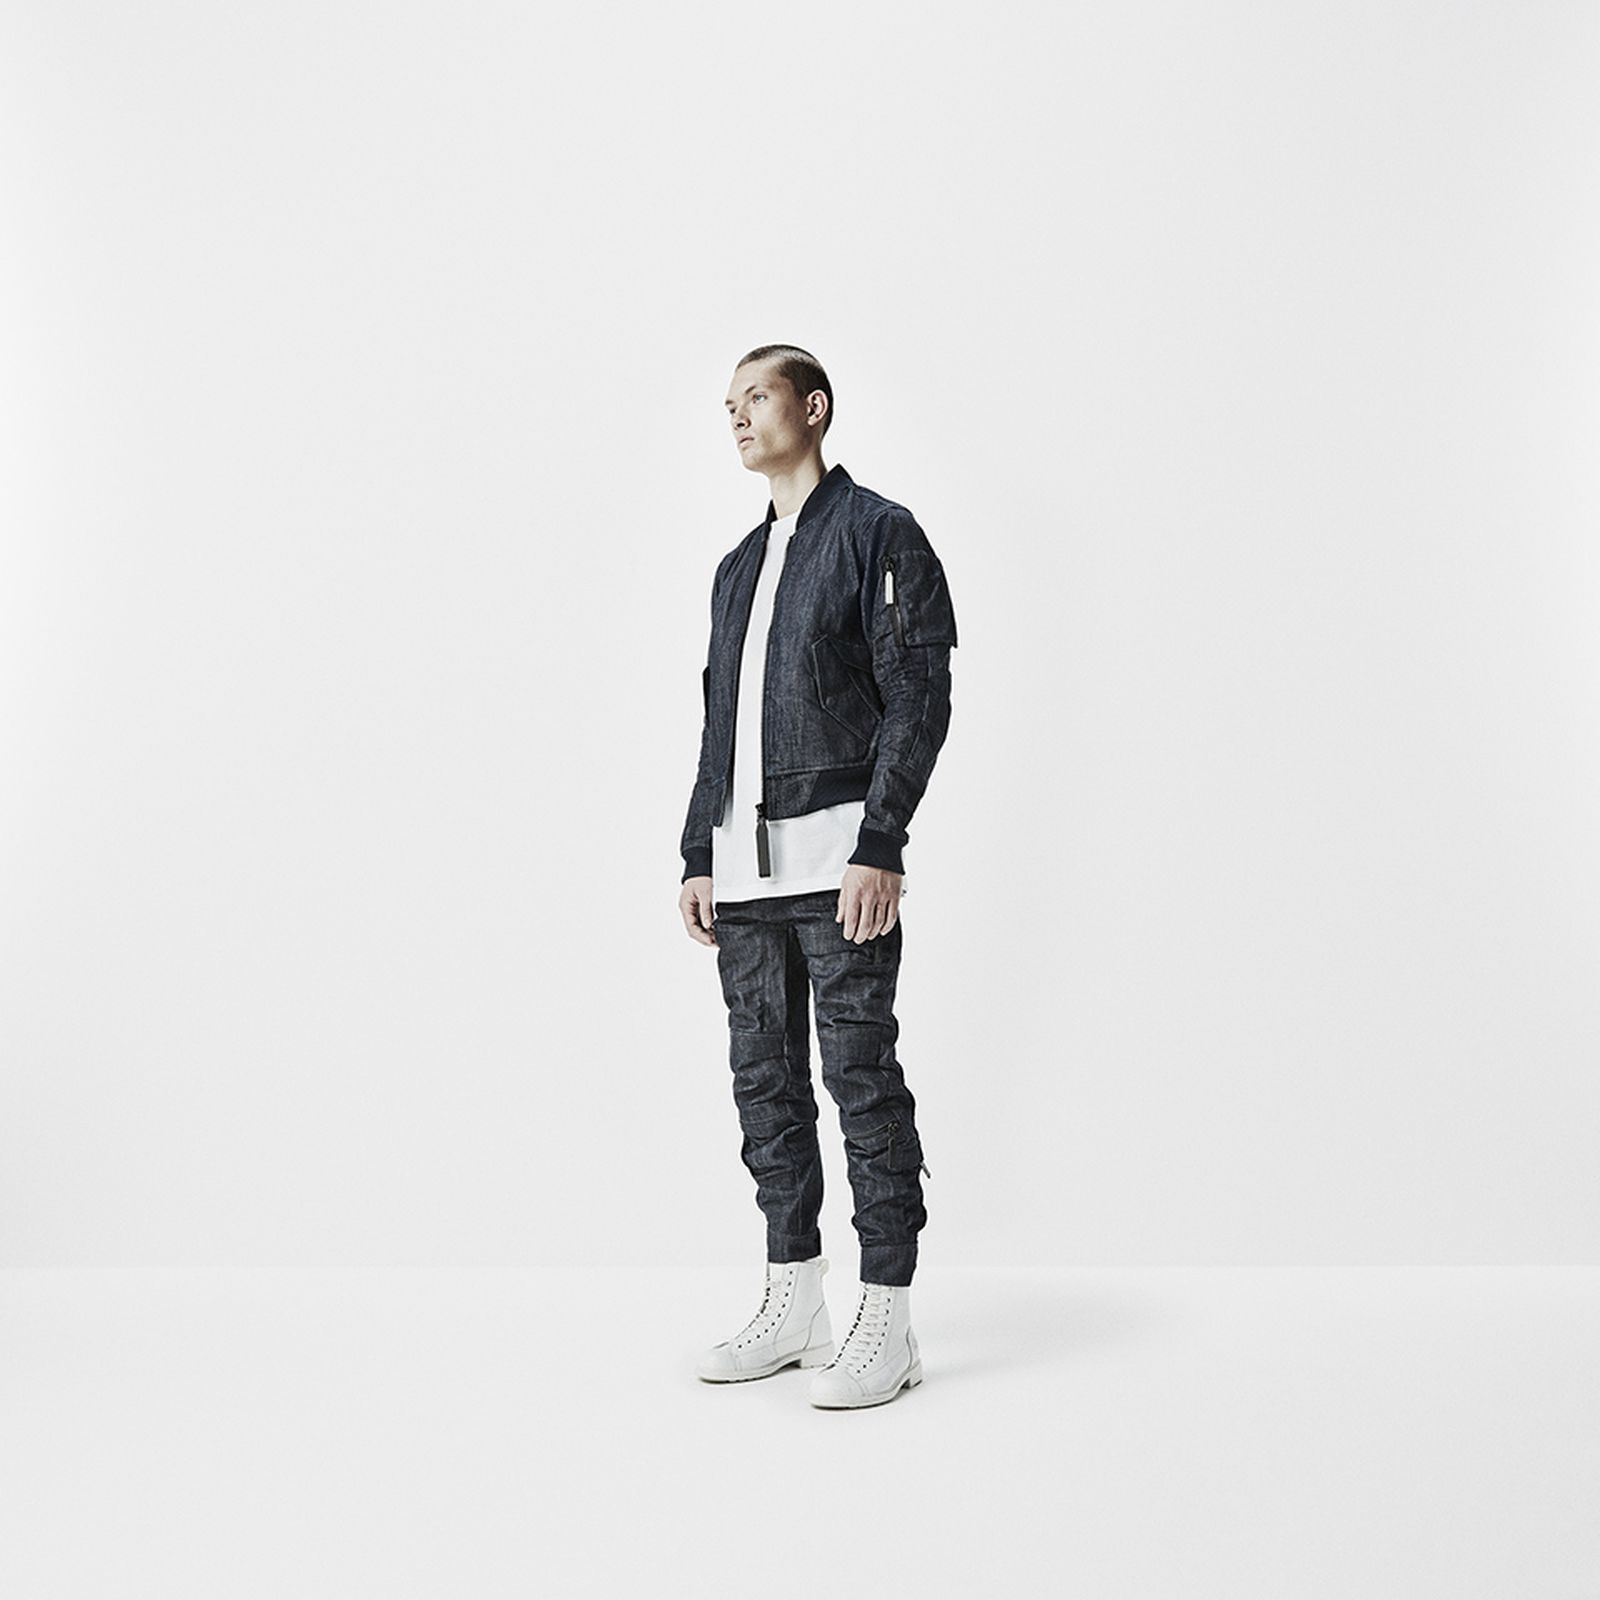 gstar-raw-research-aitor-throup-11